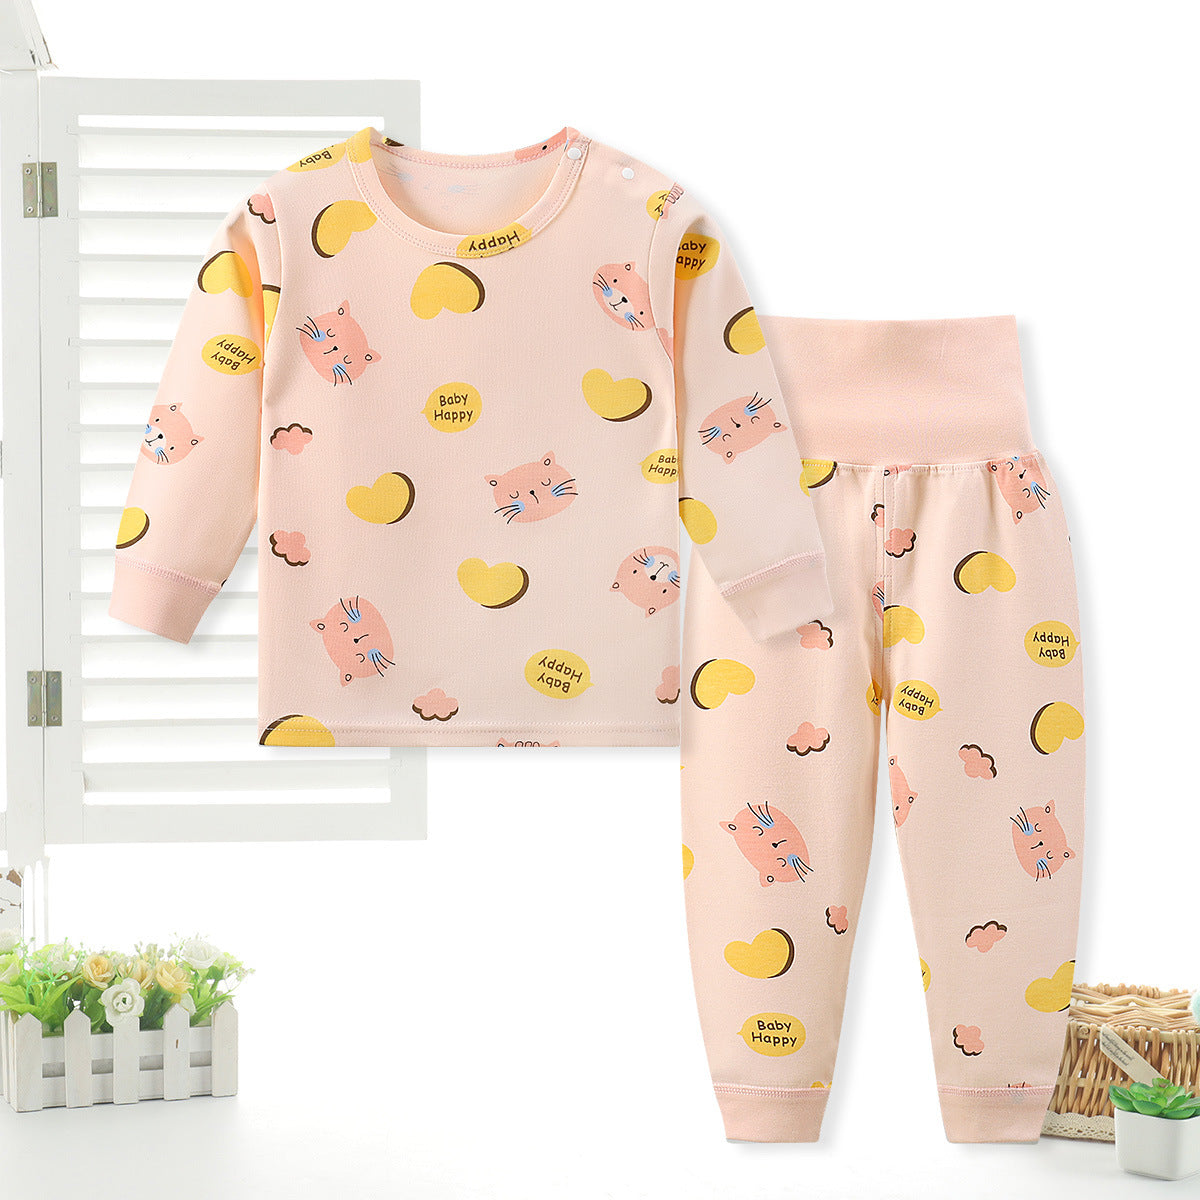 Spring and autumn new children's cotton underwear sleeve infant home high waist talents, men and women, baby, autumn clothes